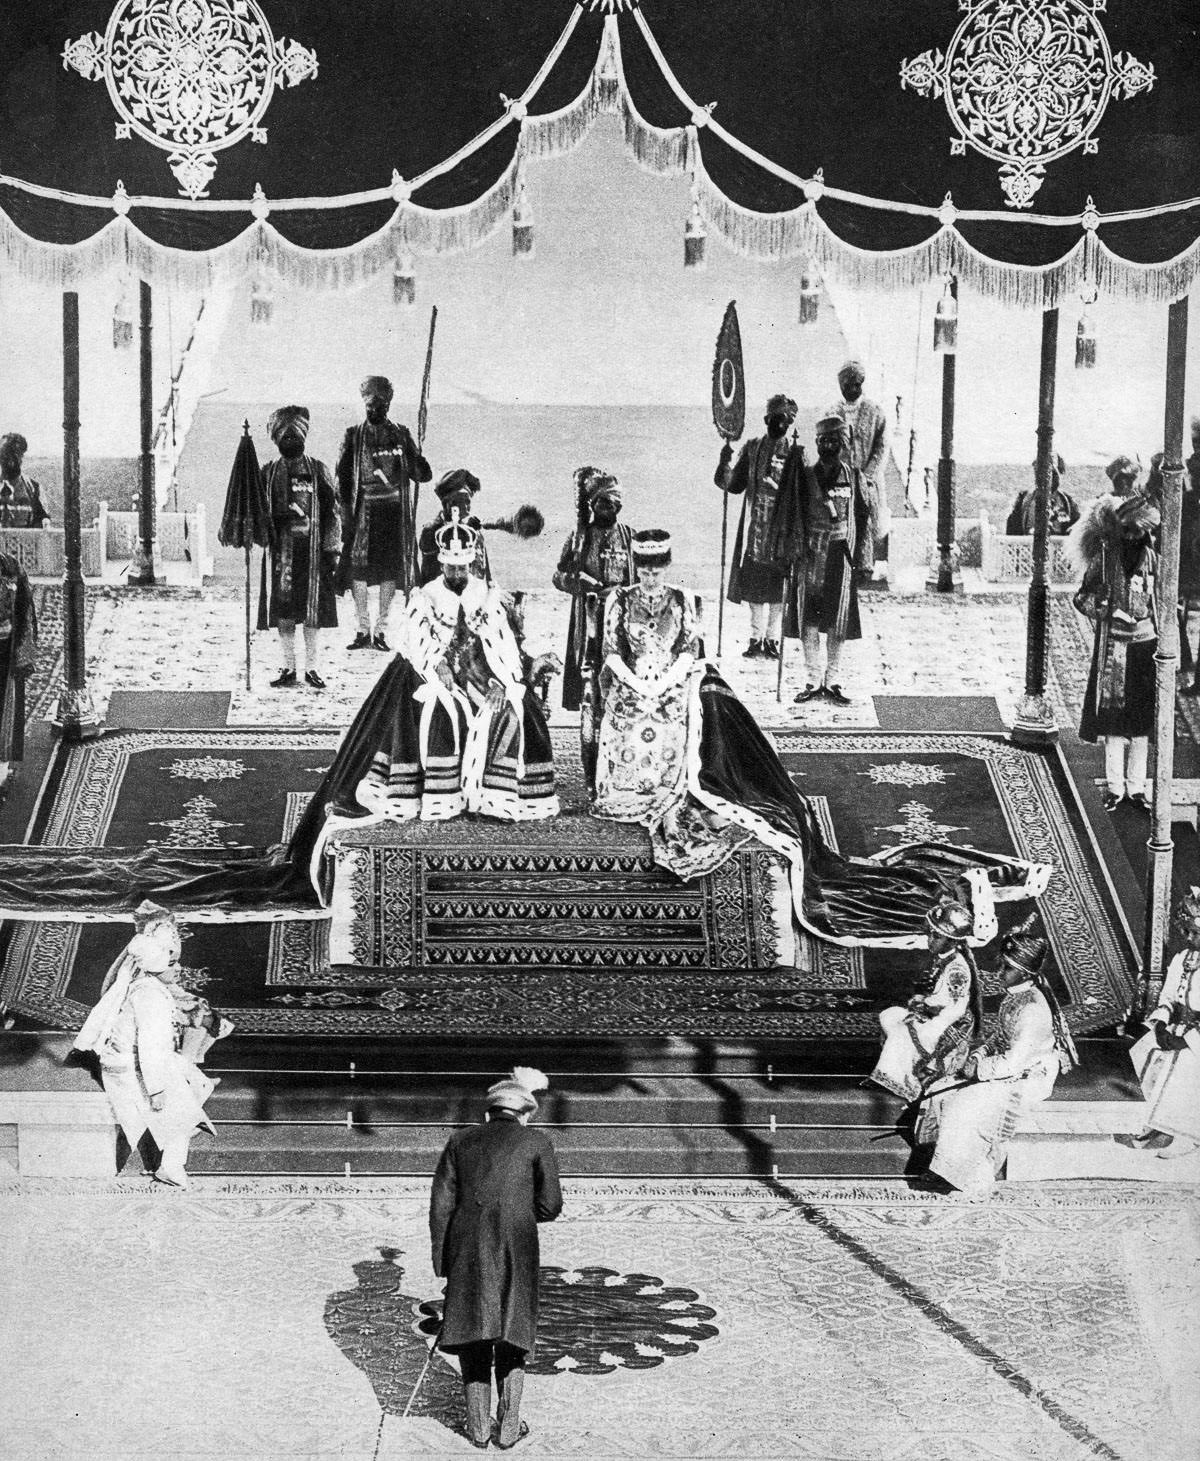 The Nizam of Hyderabad pays homage to the king and queen at the Delhi Durbar.